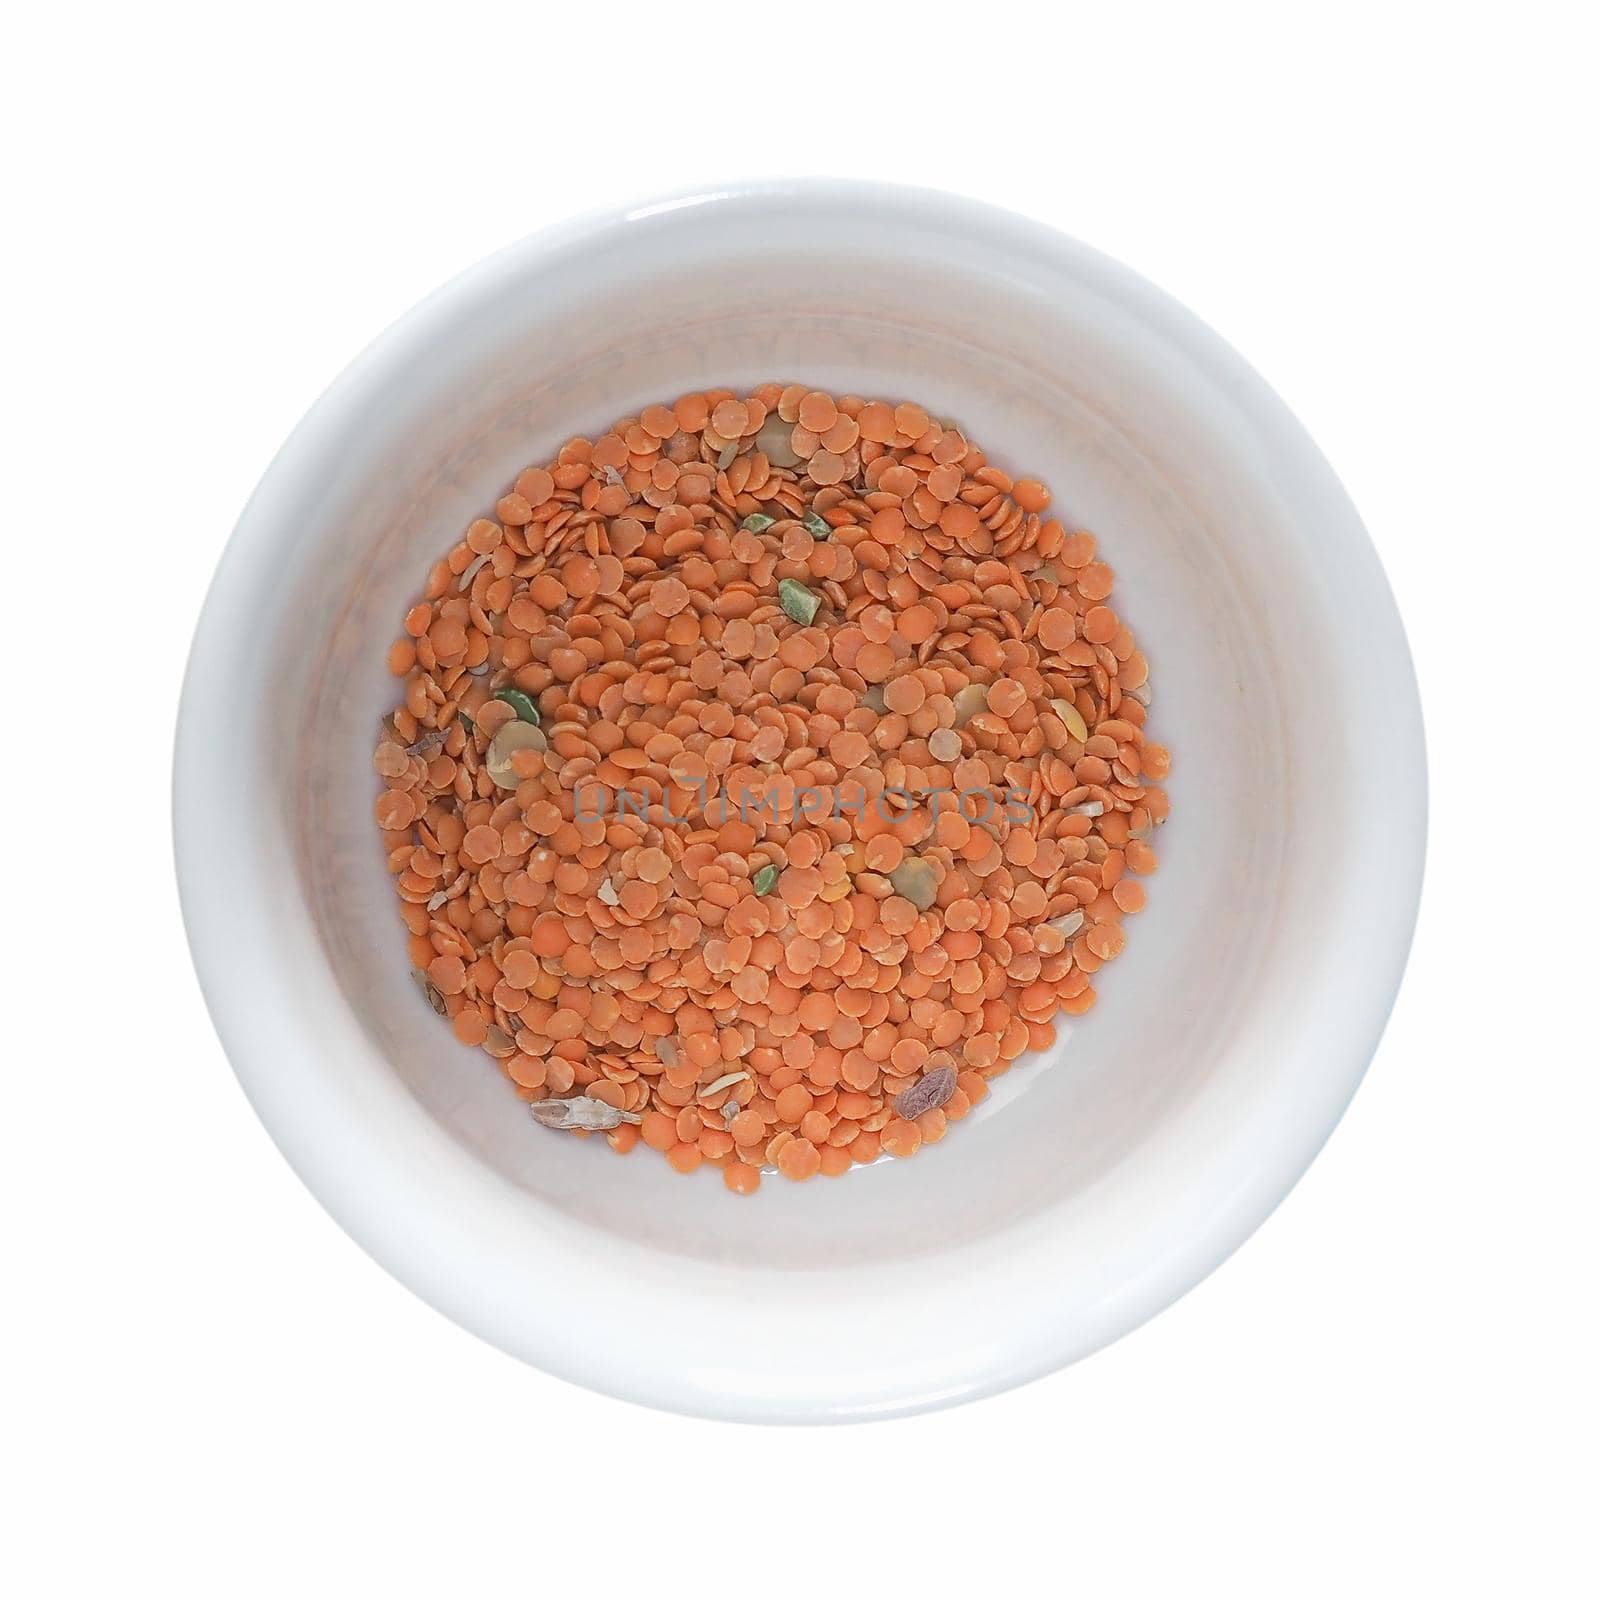 red lentils in a bow on a table isolated over white background